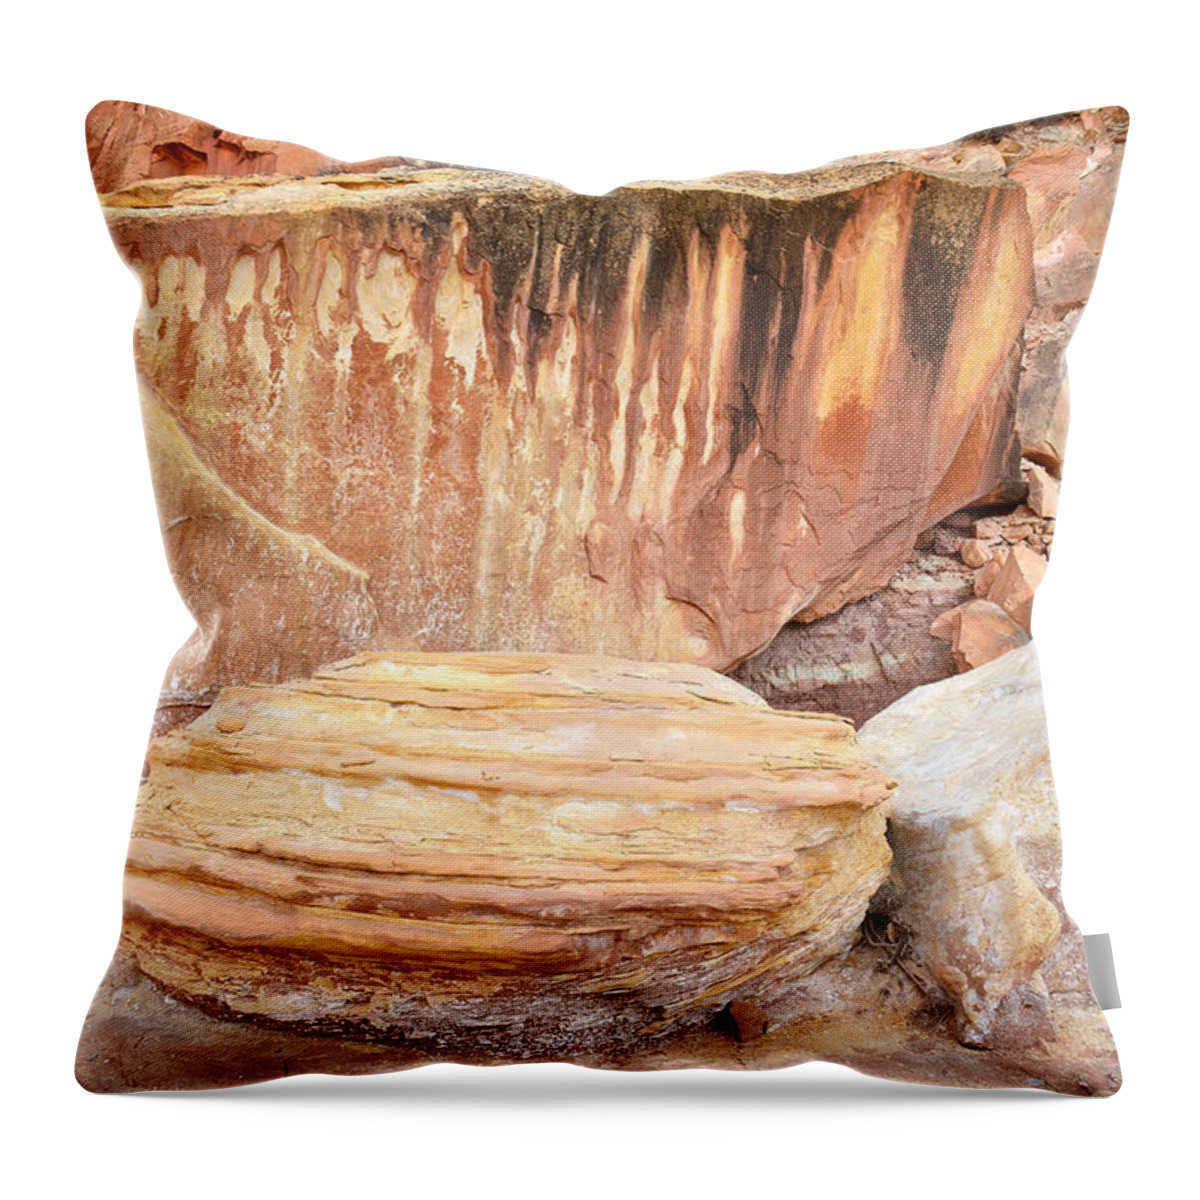 Capitol Reef National Park Throw Pillow featuring the photograph Grand Wash Rock Art by Ray Mathis